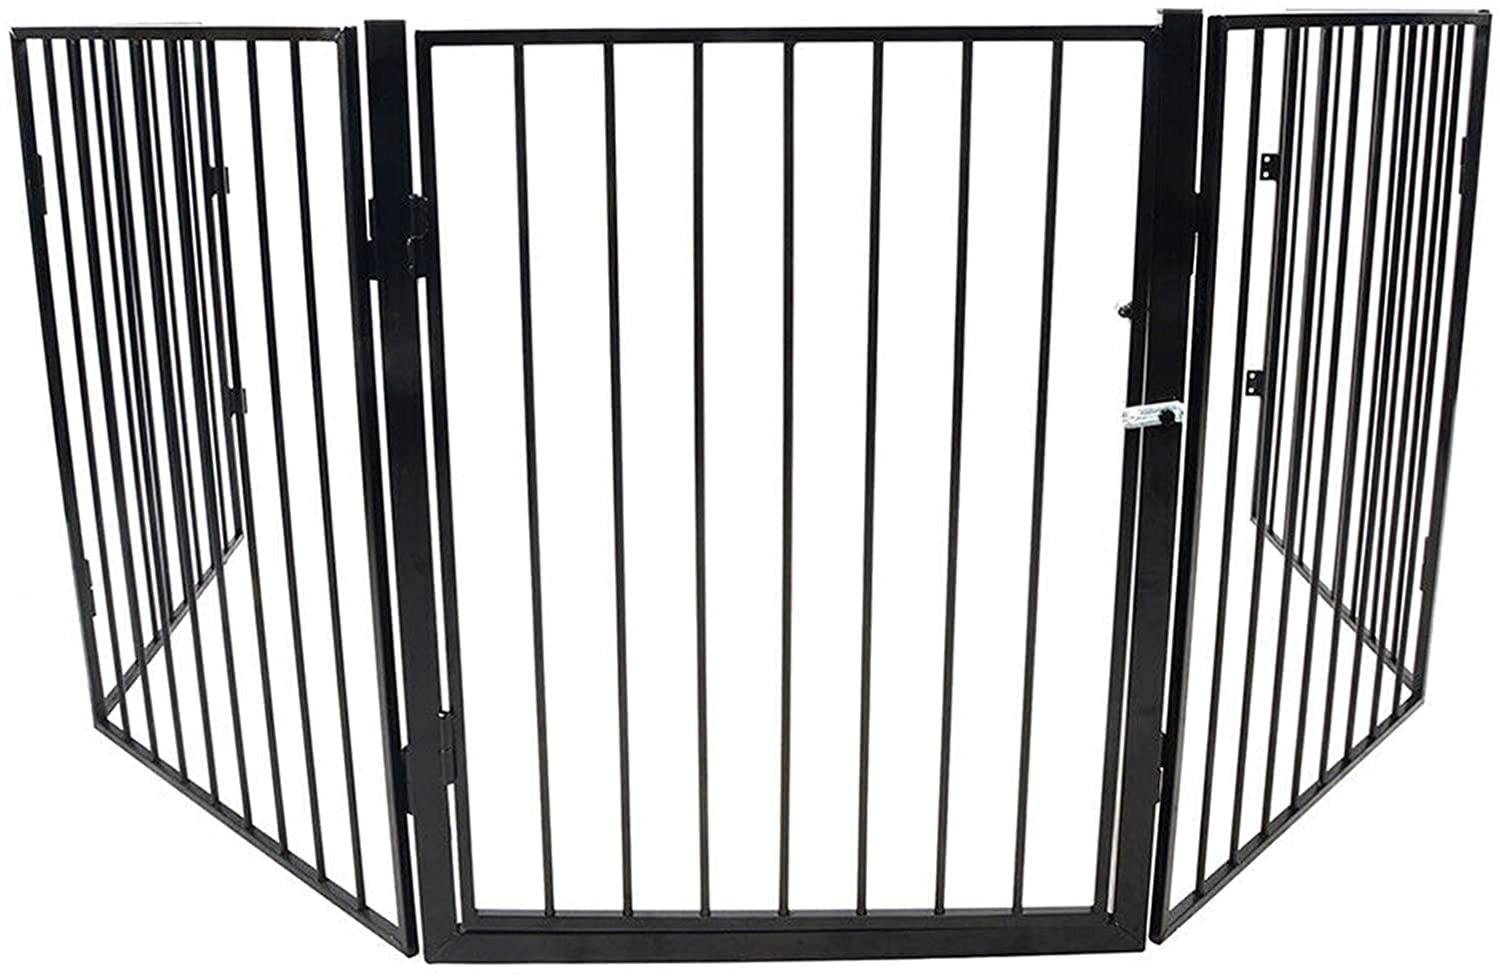 121-Inch Metal Fireplace Fence Guard 5-Panel Baby Safety Gate/Barrier/Play Yard with Door Christmas Tree Fence Hearth Gate for Kids/Pet/Toddler/Dog/Cat, Black